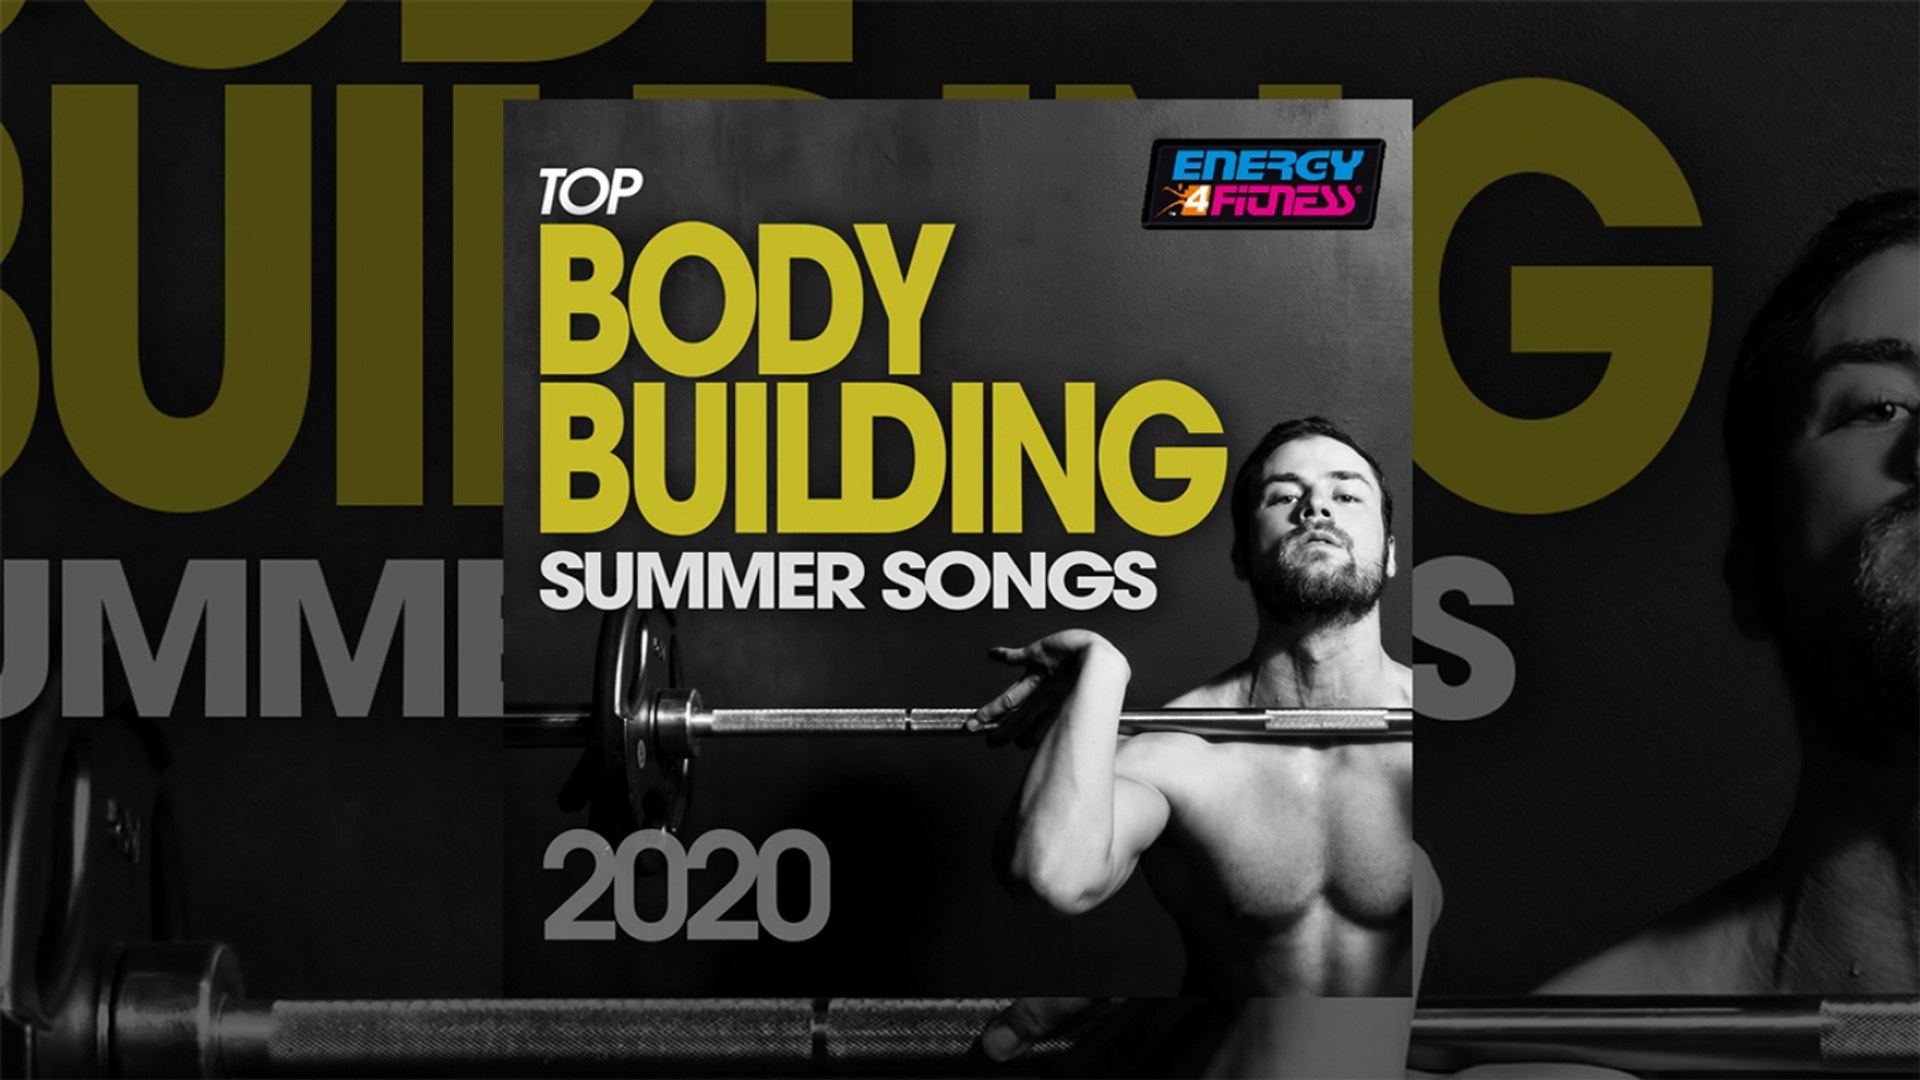 E4F - Top Body Building Summer Songs 2020 - Fitness & Music 2020